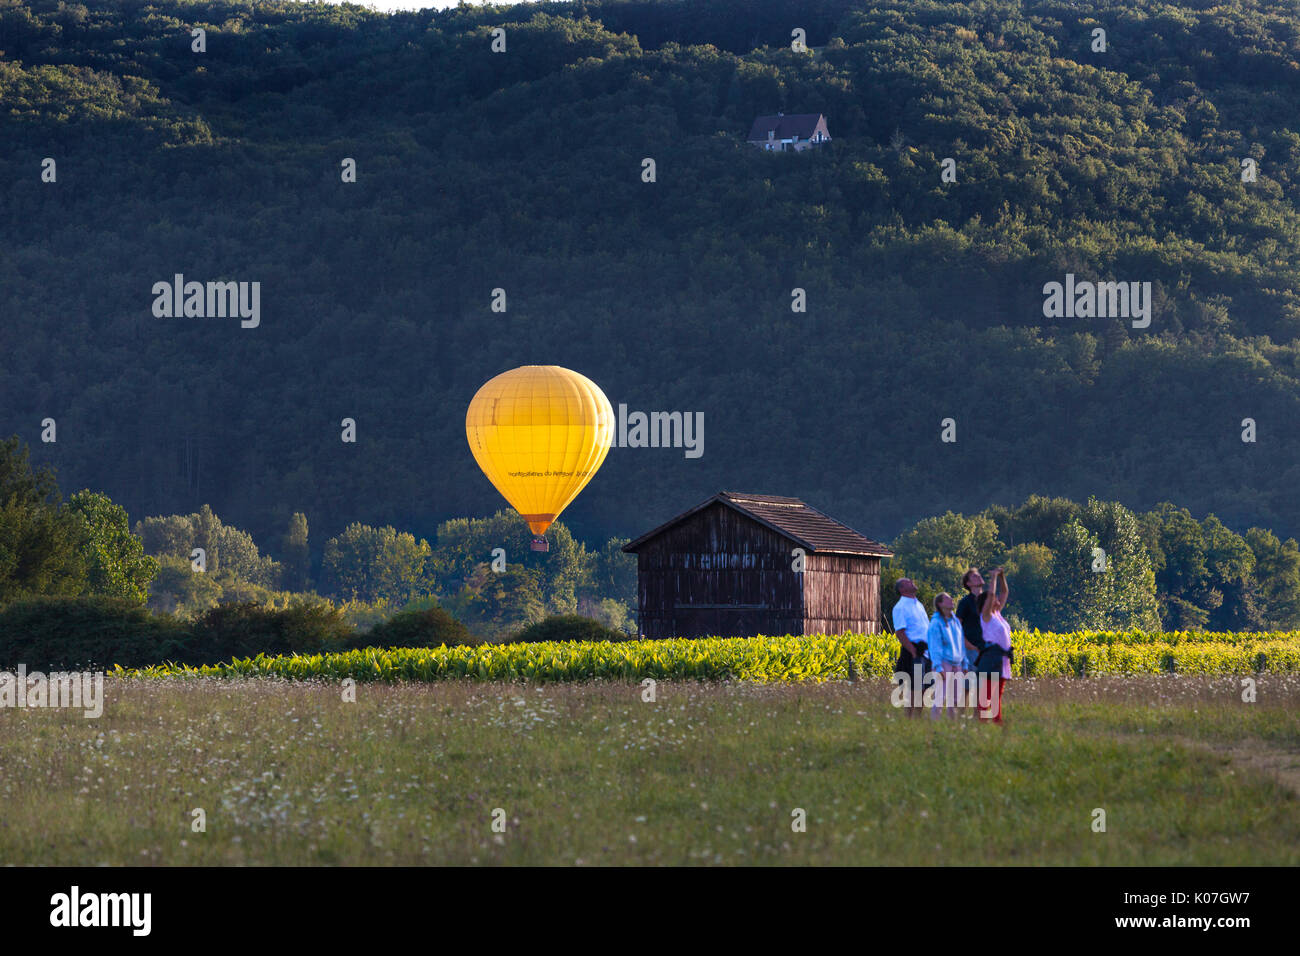 A Hot Air Balloon Illuminated by the Setting Sun with a Group of People Looking Skywards, Dordogne, France, Europe. Stock Photo